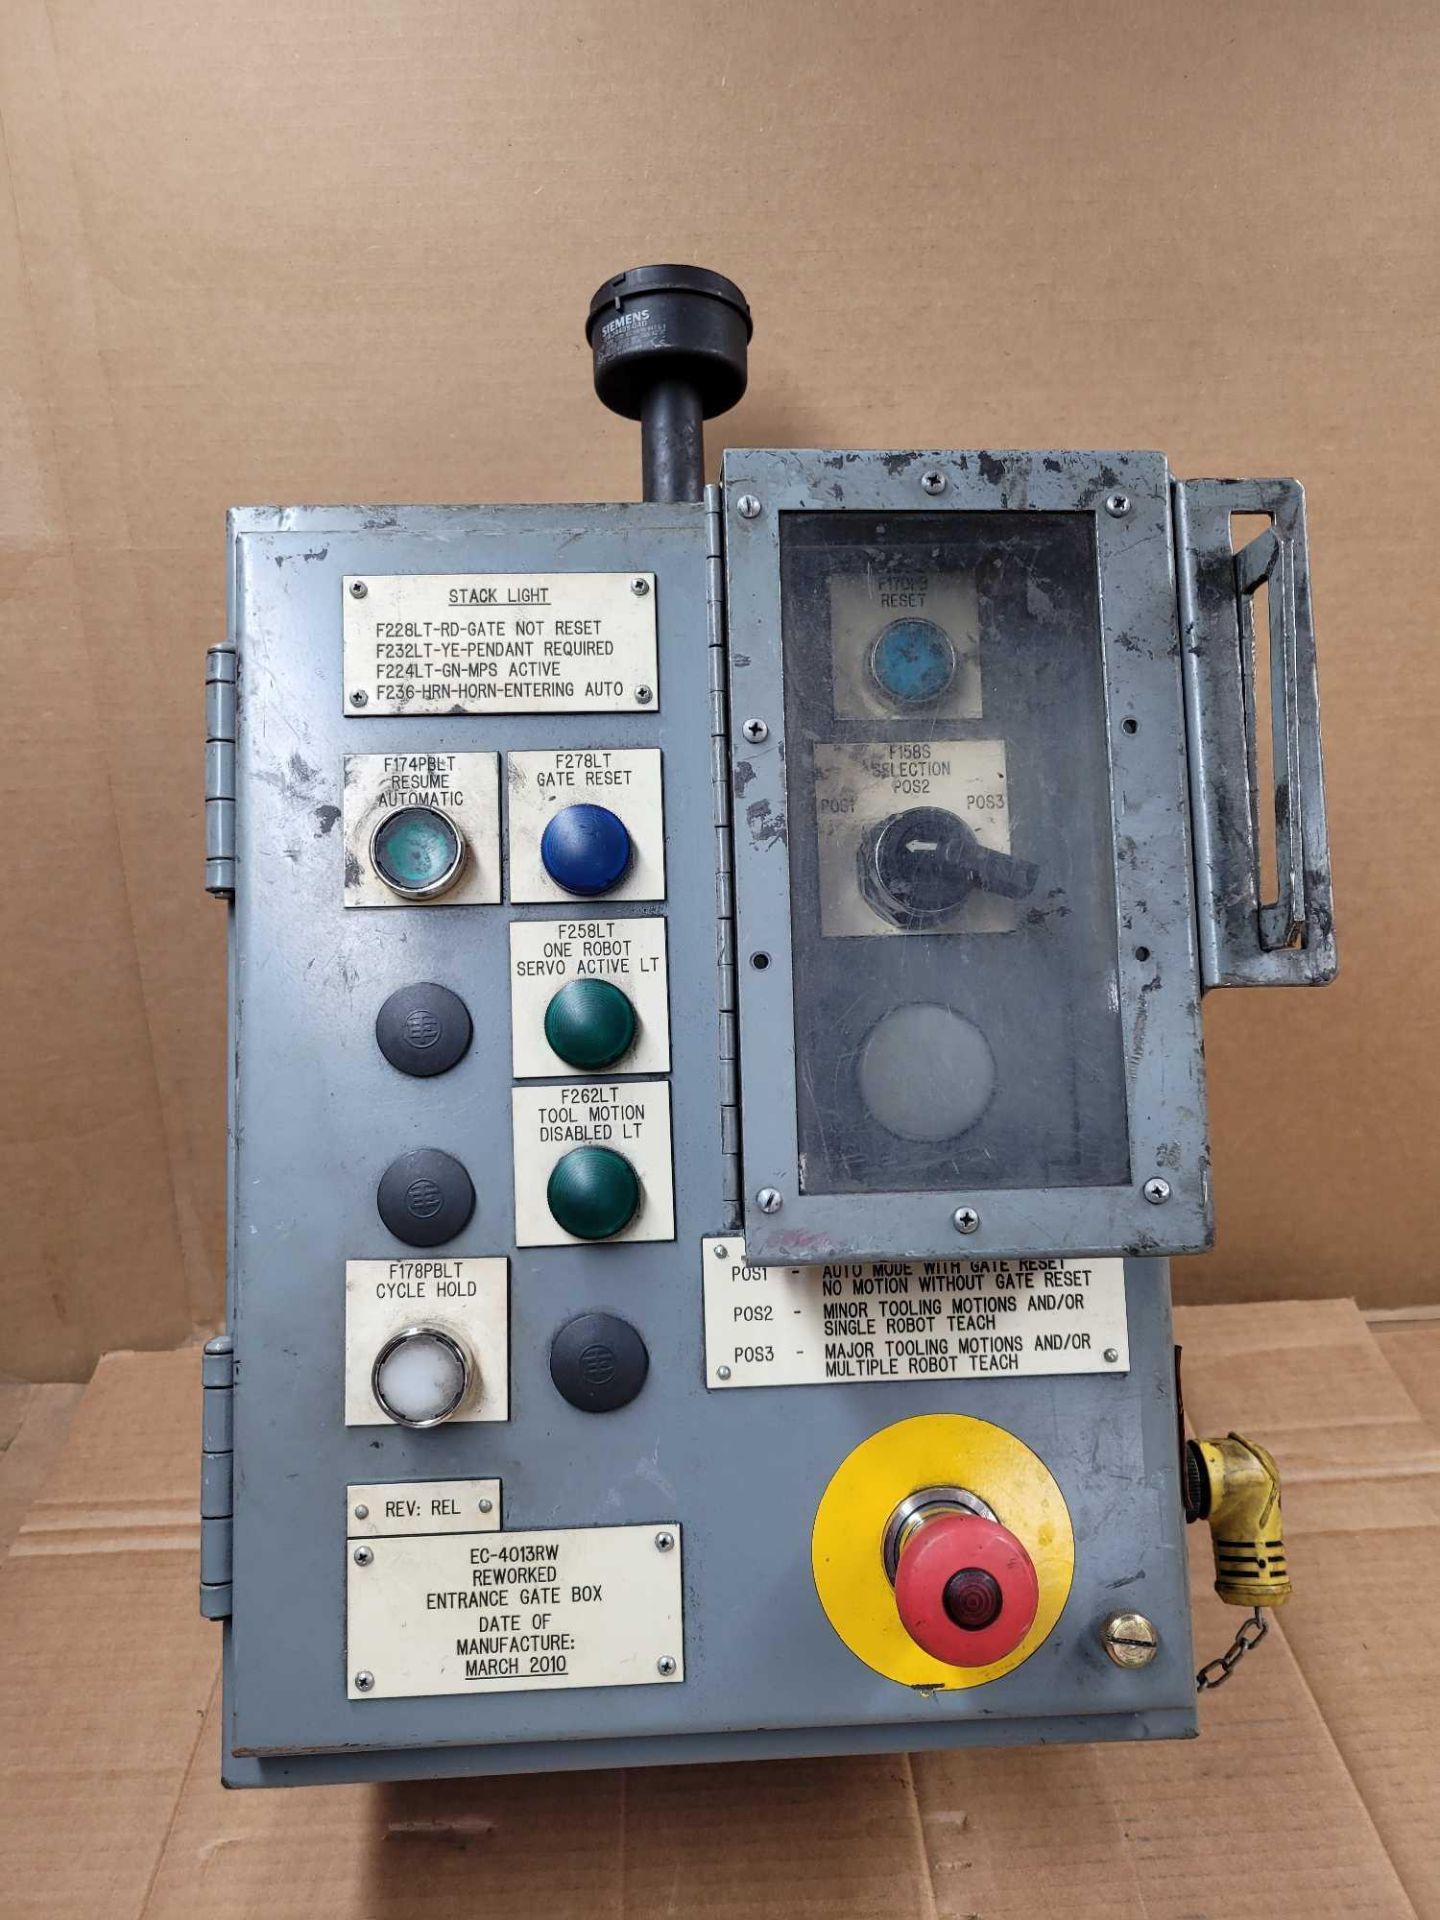 X-BAR AUTOMATION EC-4013RW / Reworked Entrance Gate Box  /  Lot Weight: 37.4 lbs